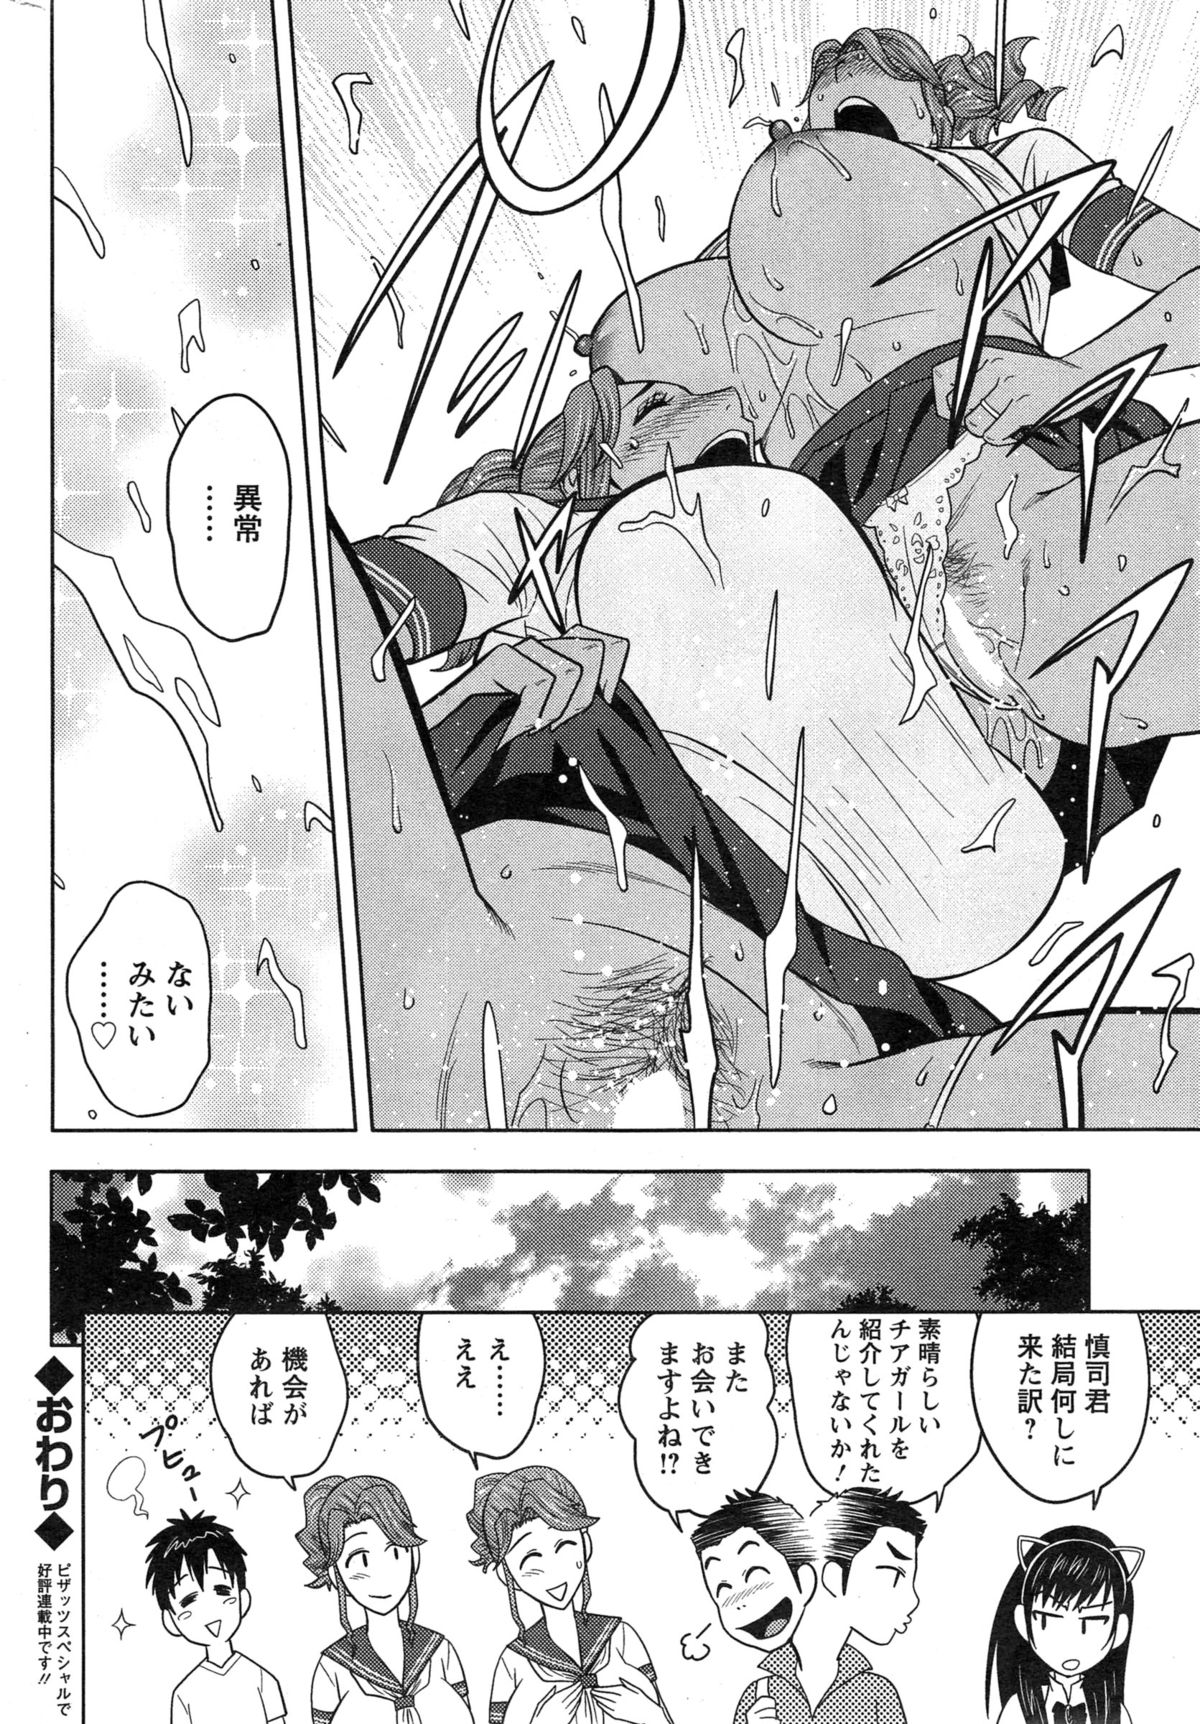 Action Pizazz Cgumi 2015-02 page 48 full